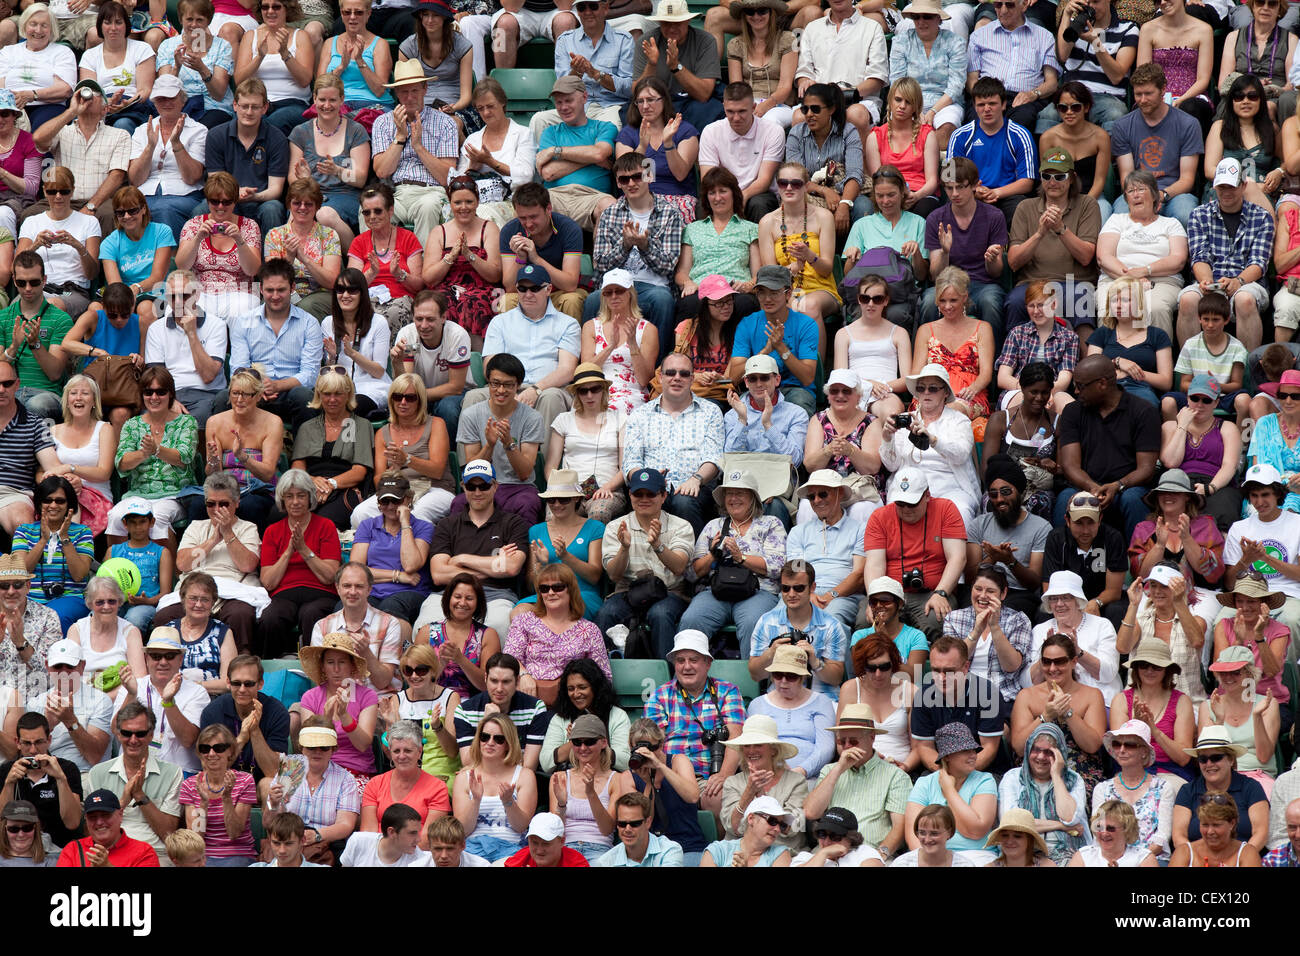 the-crowd-watching-a-match-at-the-championships-wimbledon-2011-the-CEX120.jpg